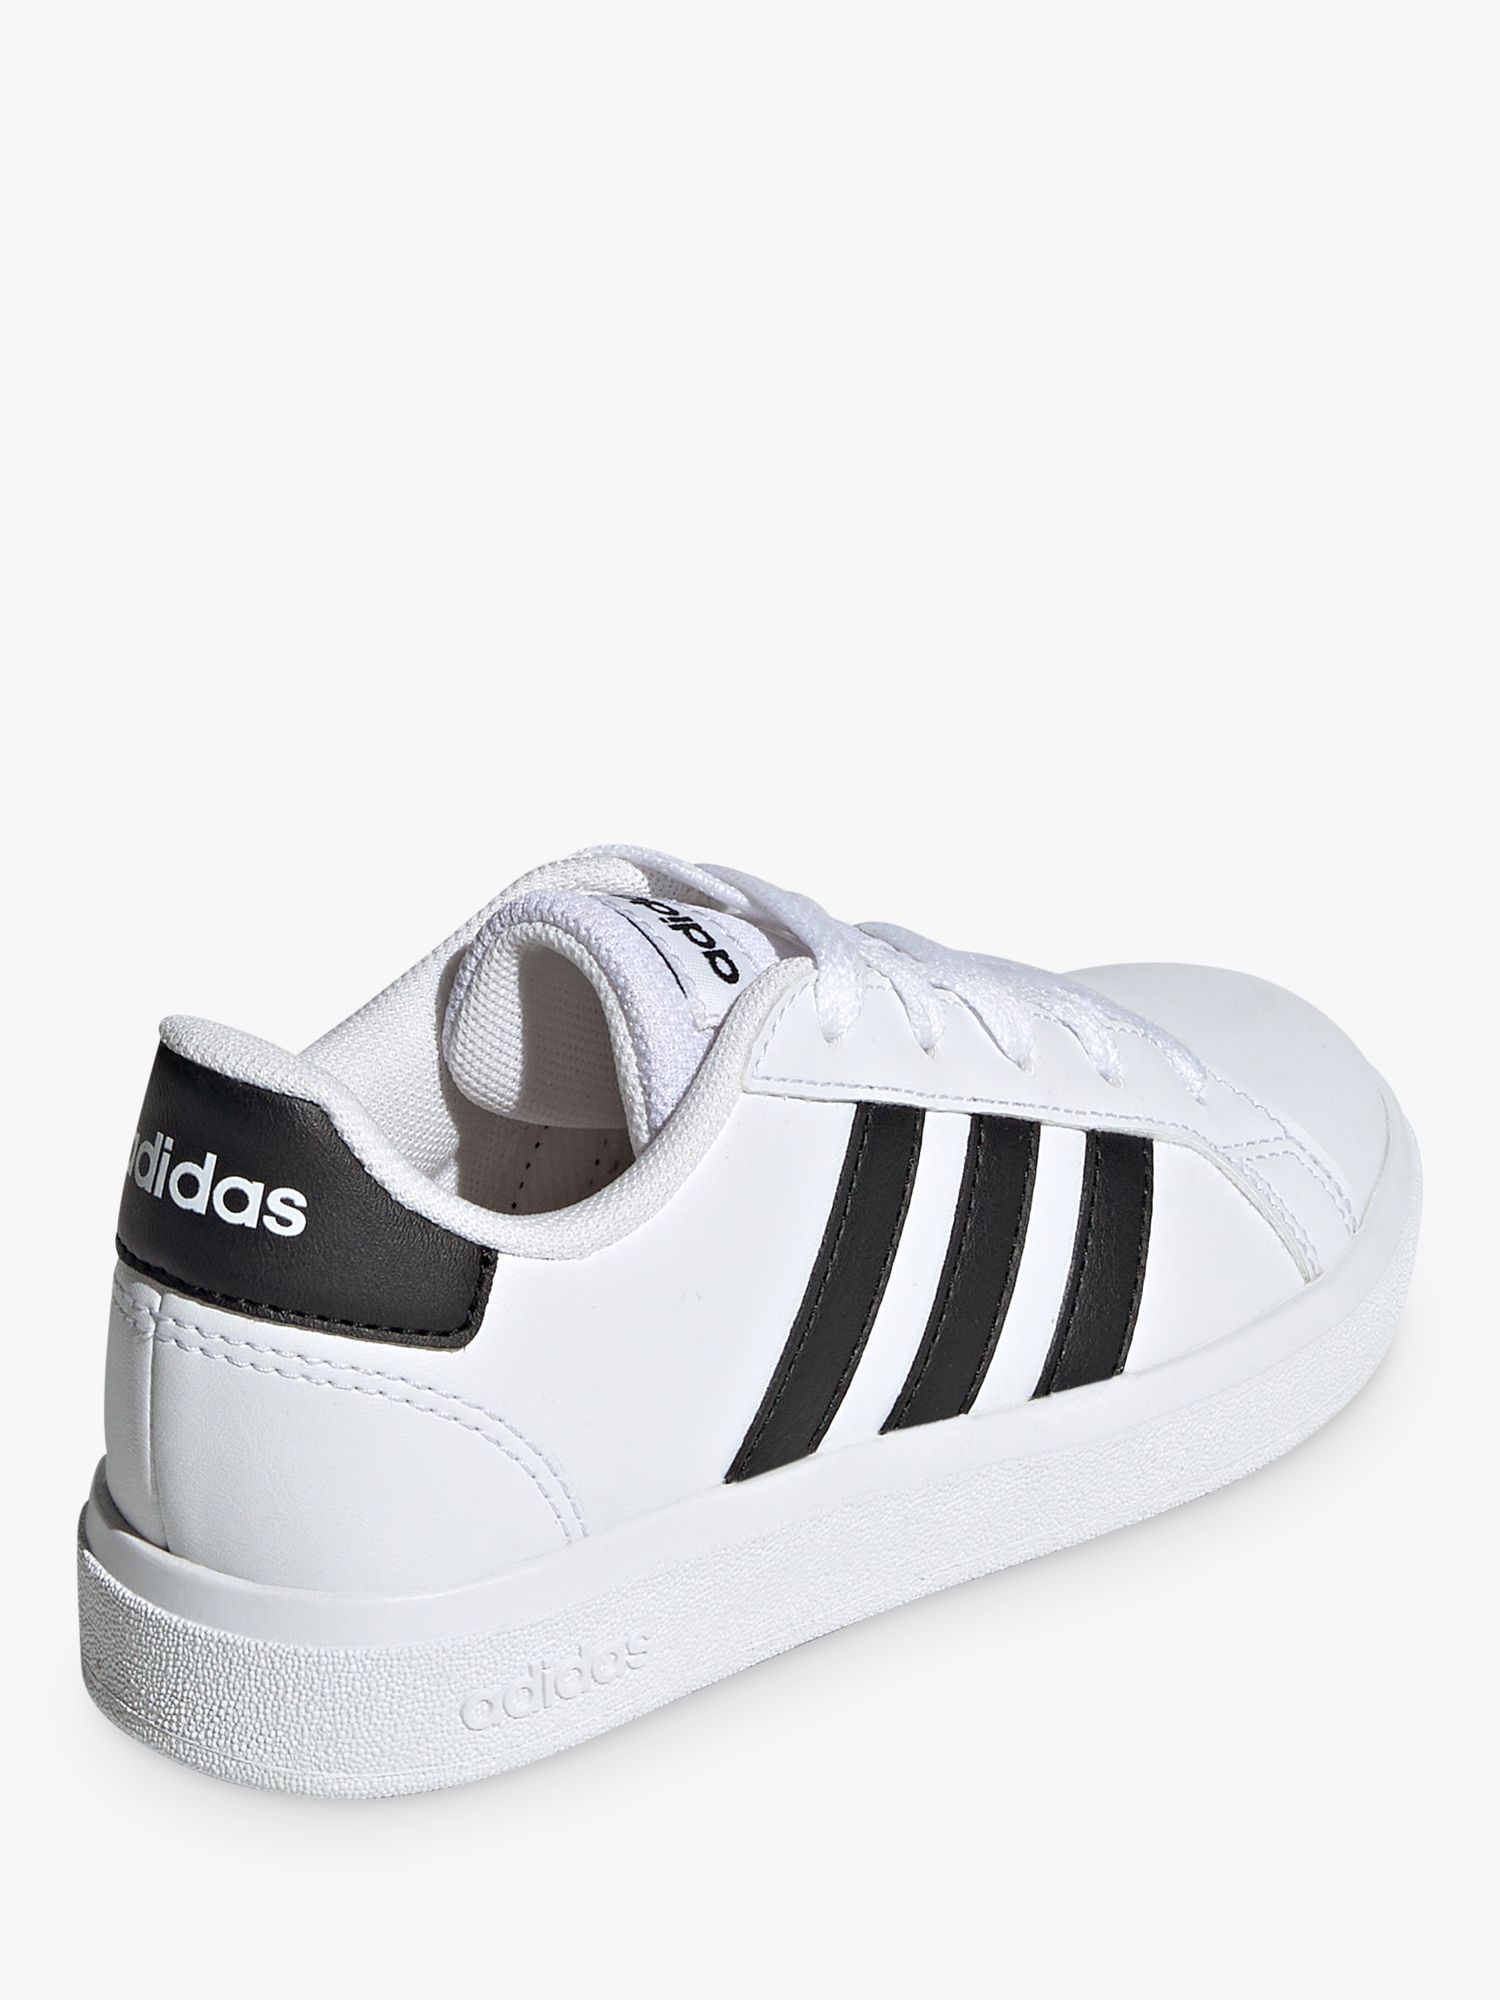 adidas Kids' Grand Court 2.0 Trainers, White/Black at John Lewis & Partners